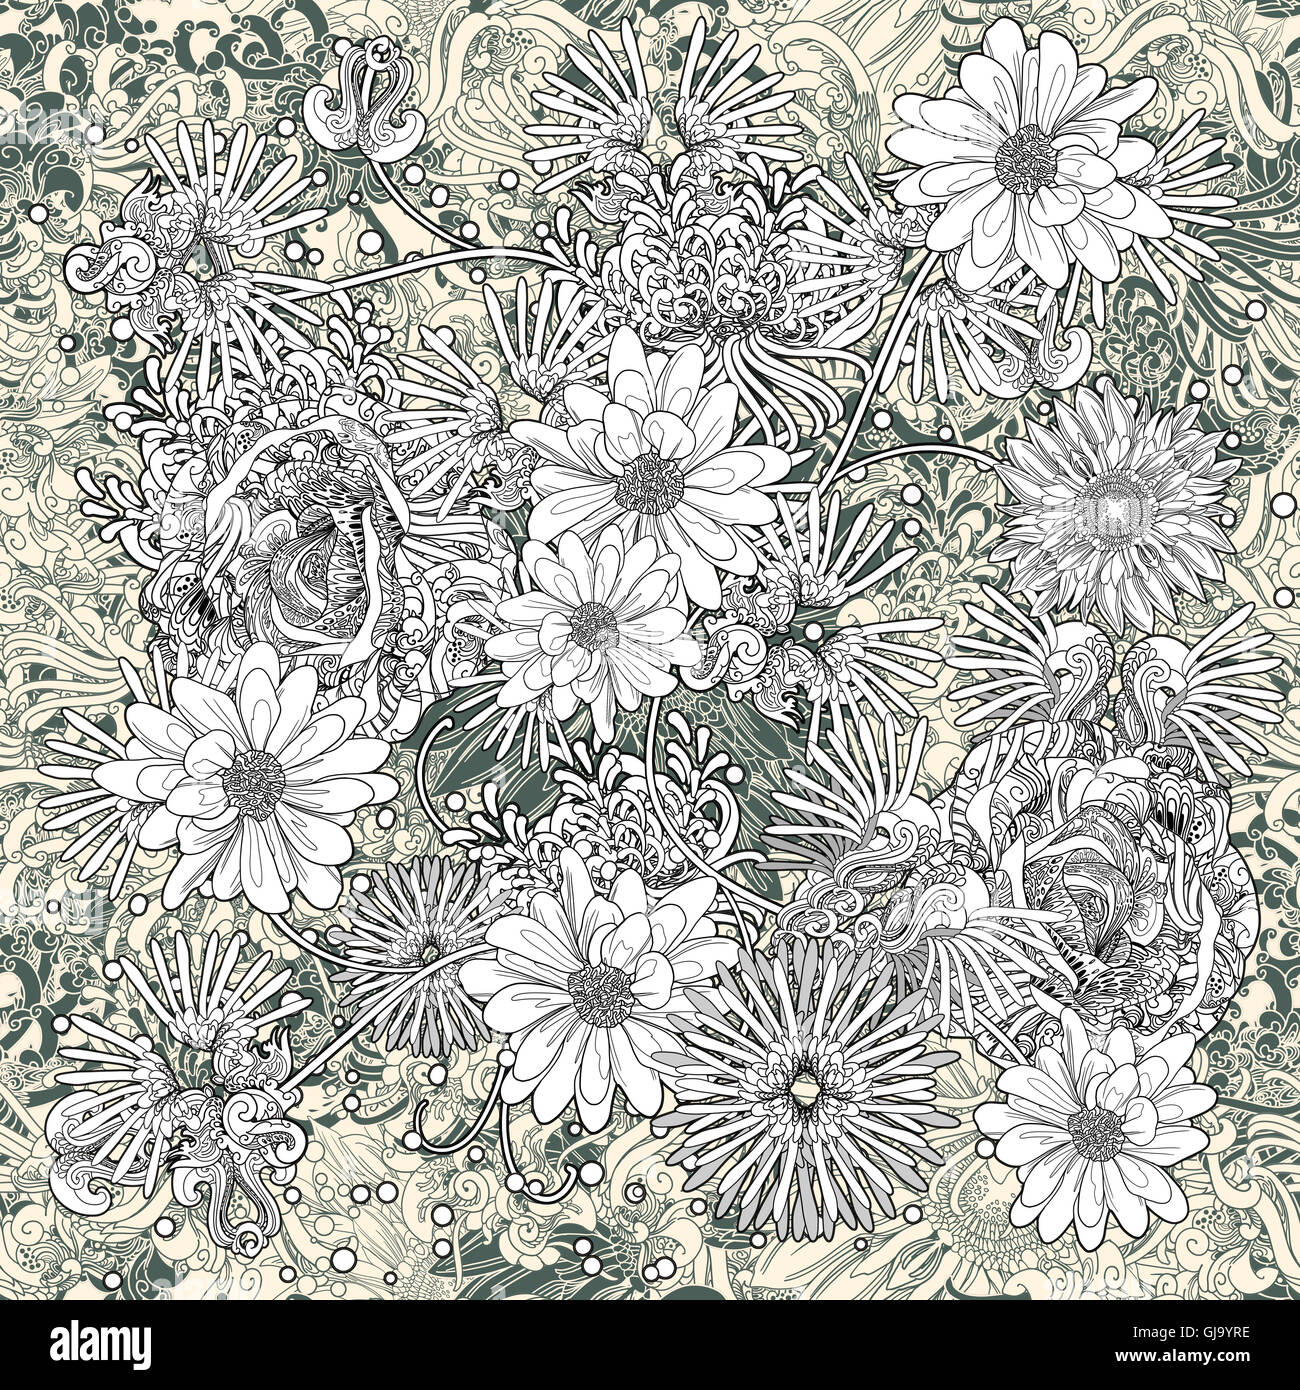 flowers seamless pattern,floral,monochrome endless background Stock Photo